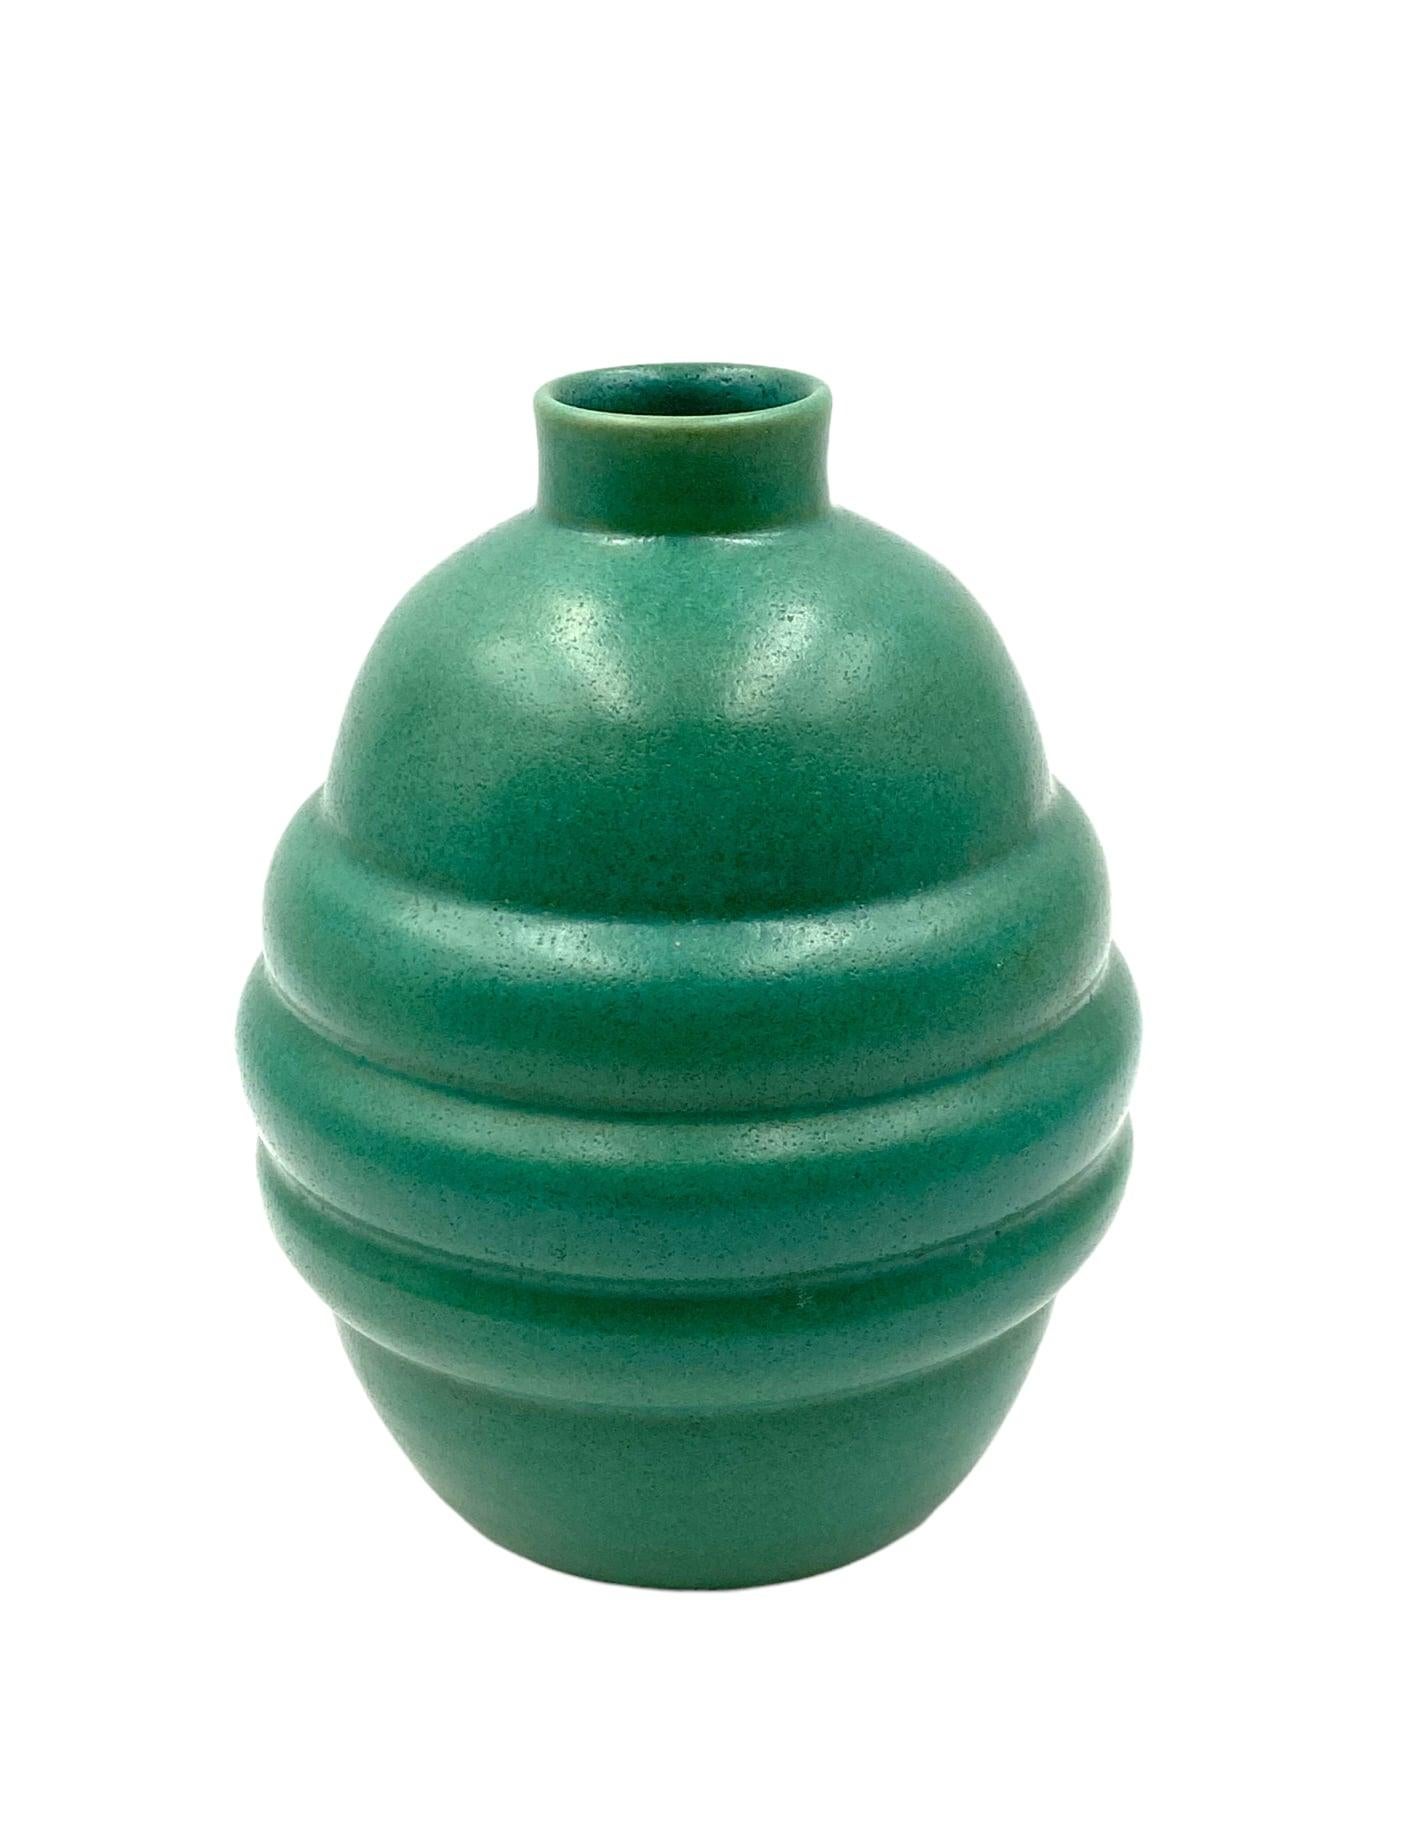 Mid-20th Century Art Déco Turquoise Faience Vase, France, 1940s For Sale